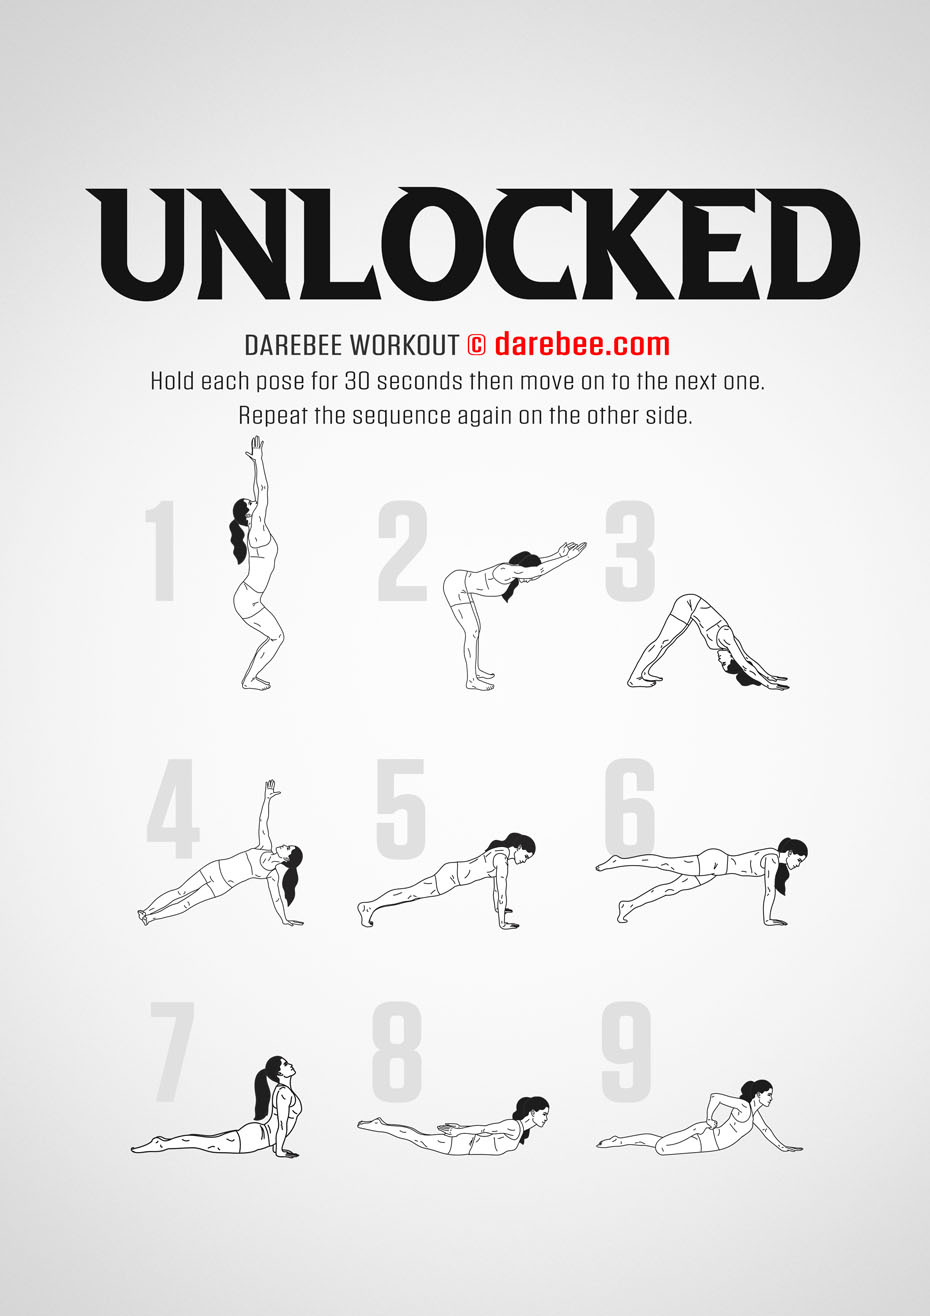 Unlocked is a Darebee home fitness workout that helps your body become more agile, increase its range of movement and help you feel both freer and more in control of your own body.